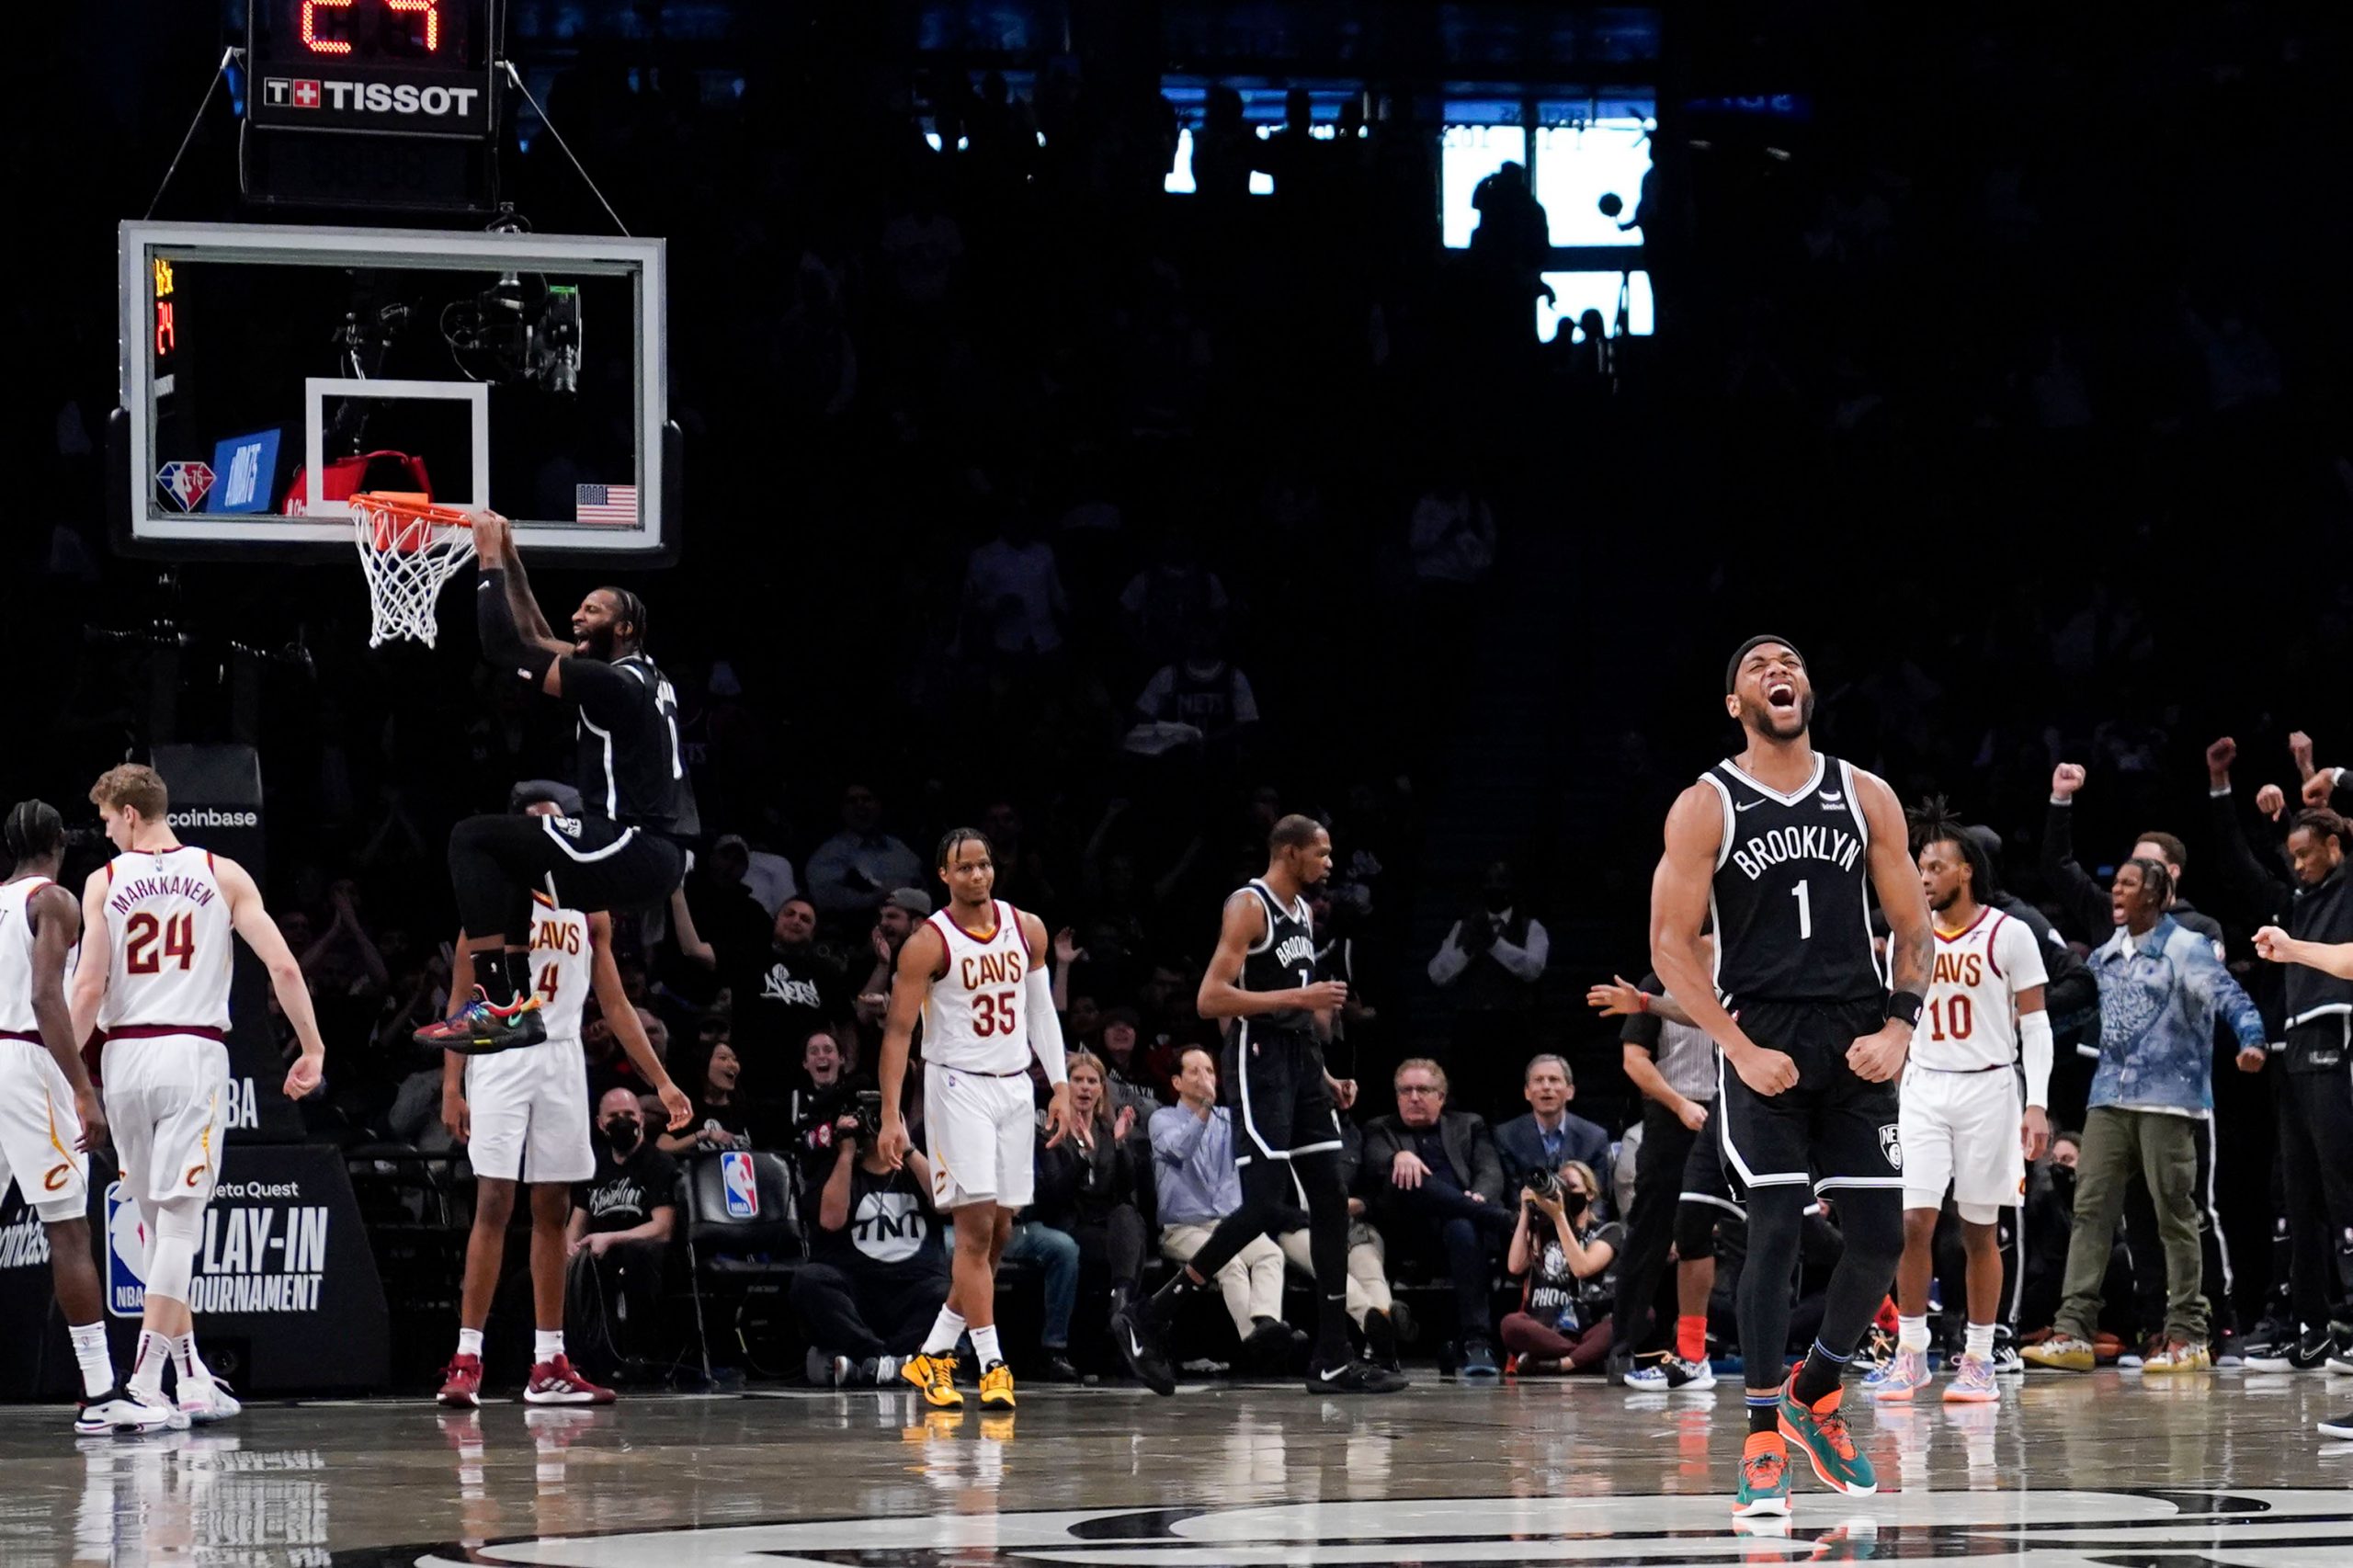 NBA: Kyrie Irving, Kevin Durant lead Brooklyn Nets past Cavaliers in play-in for No 7 seed